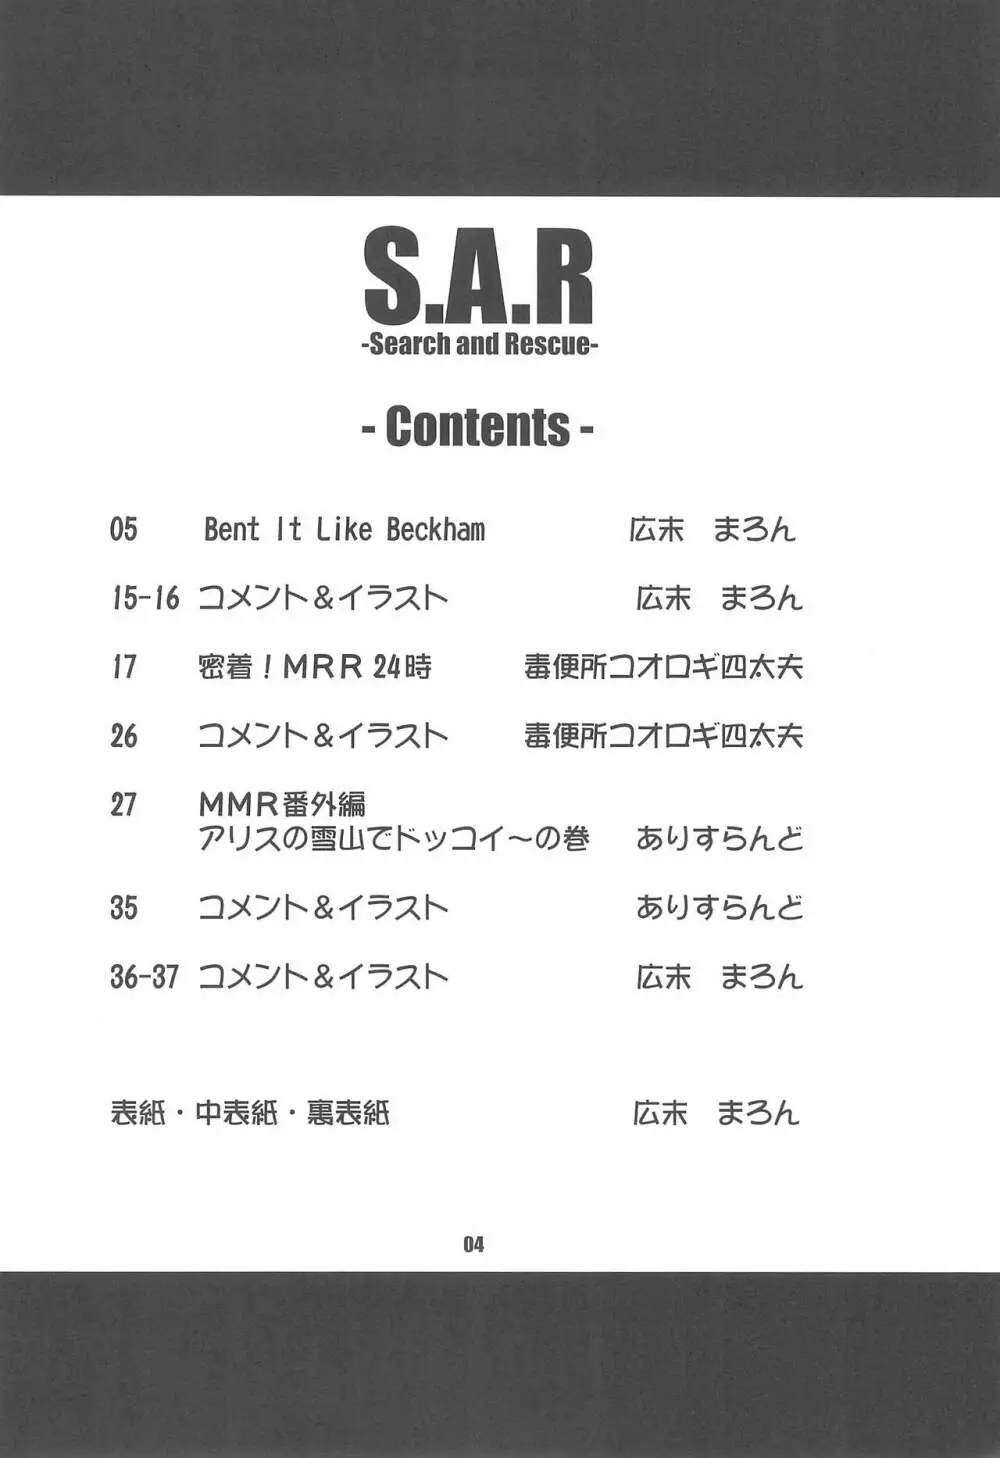 S.A.R -Search And Rescue- 4ページ